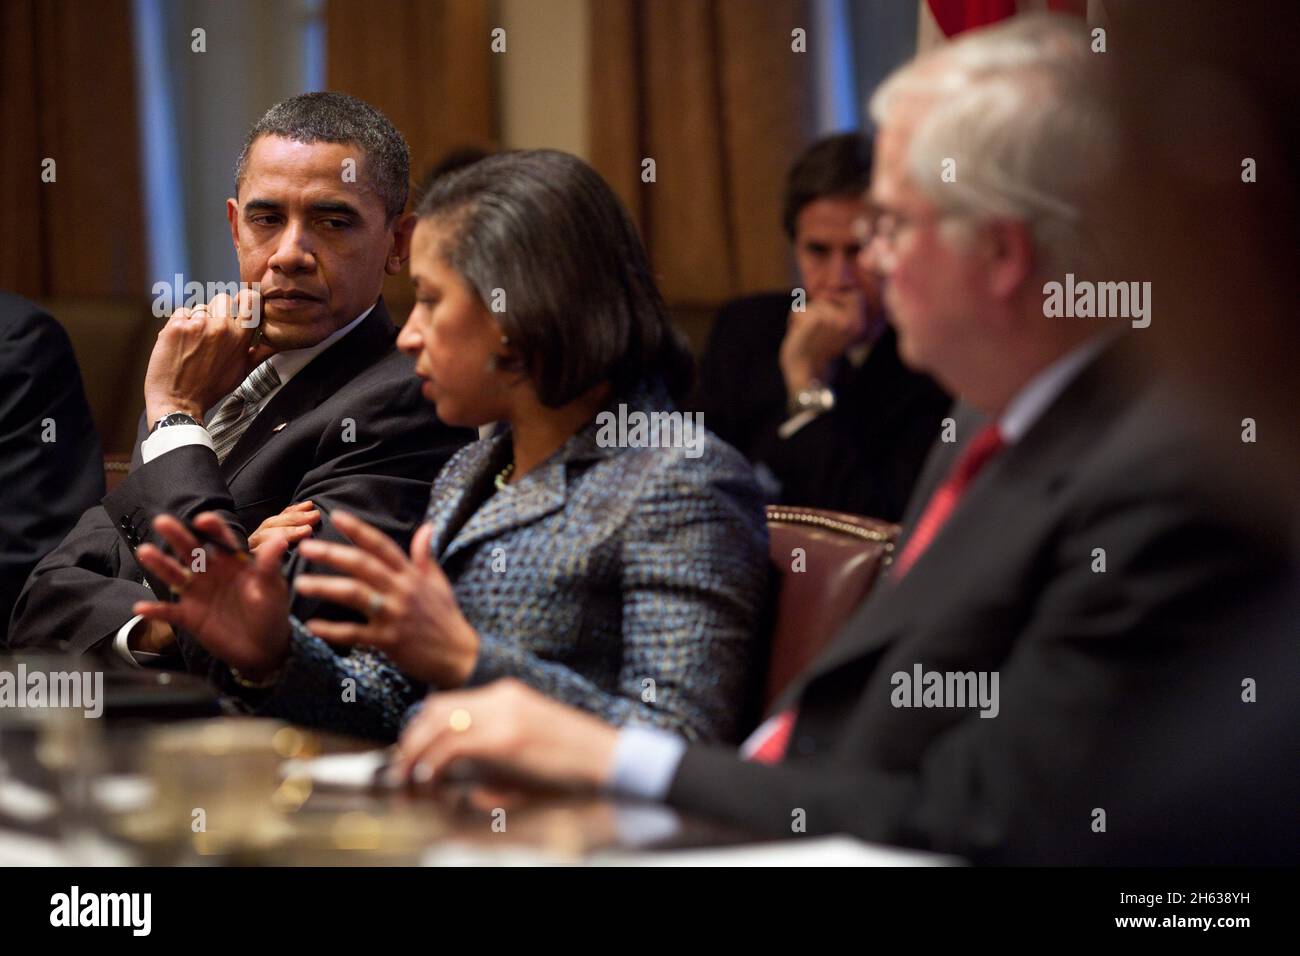 President Barack Obama listens as Susan Rice, U.S. Permanent Representative to the United Nations, speaks during a meeting with U.N. Ambassadors in the Cabinet Room of the White House, Dec. 13, 2010. Stock Photo